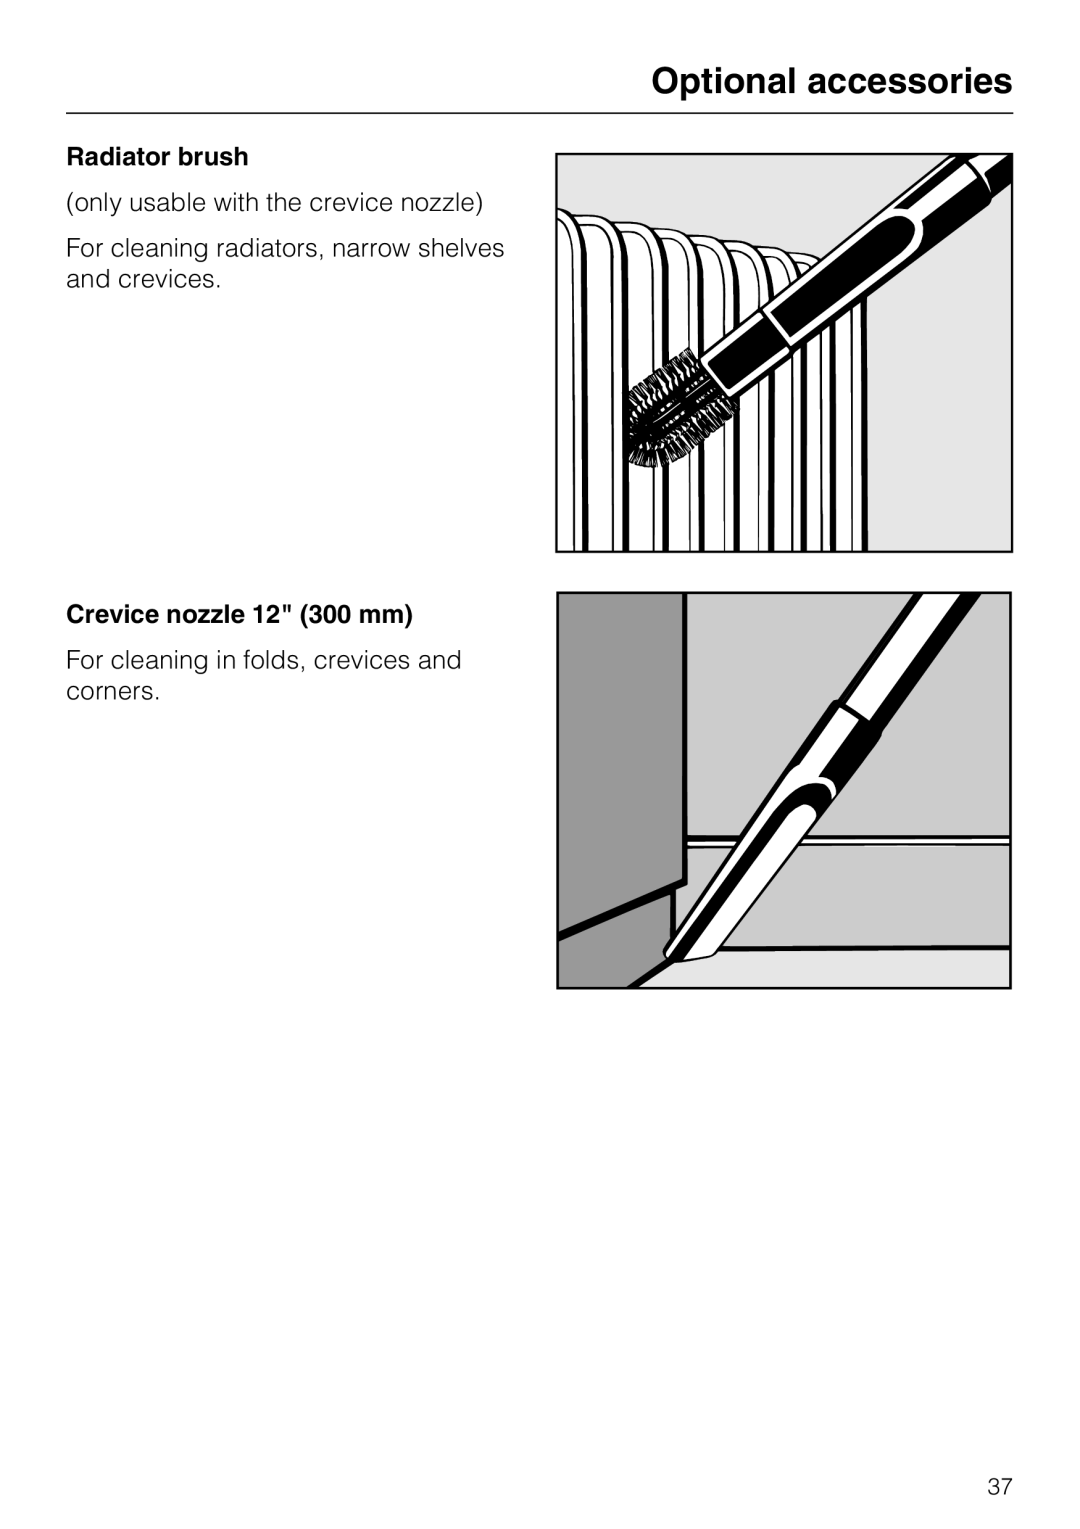 Miele S 5981 manual Optional accessories, Radiator brush, only usable with the crevice nozzle, Crevice nozzle 12 300 mm 